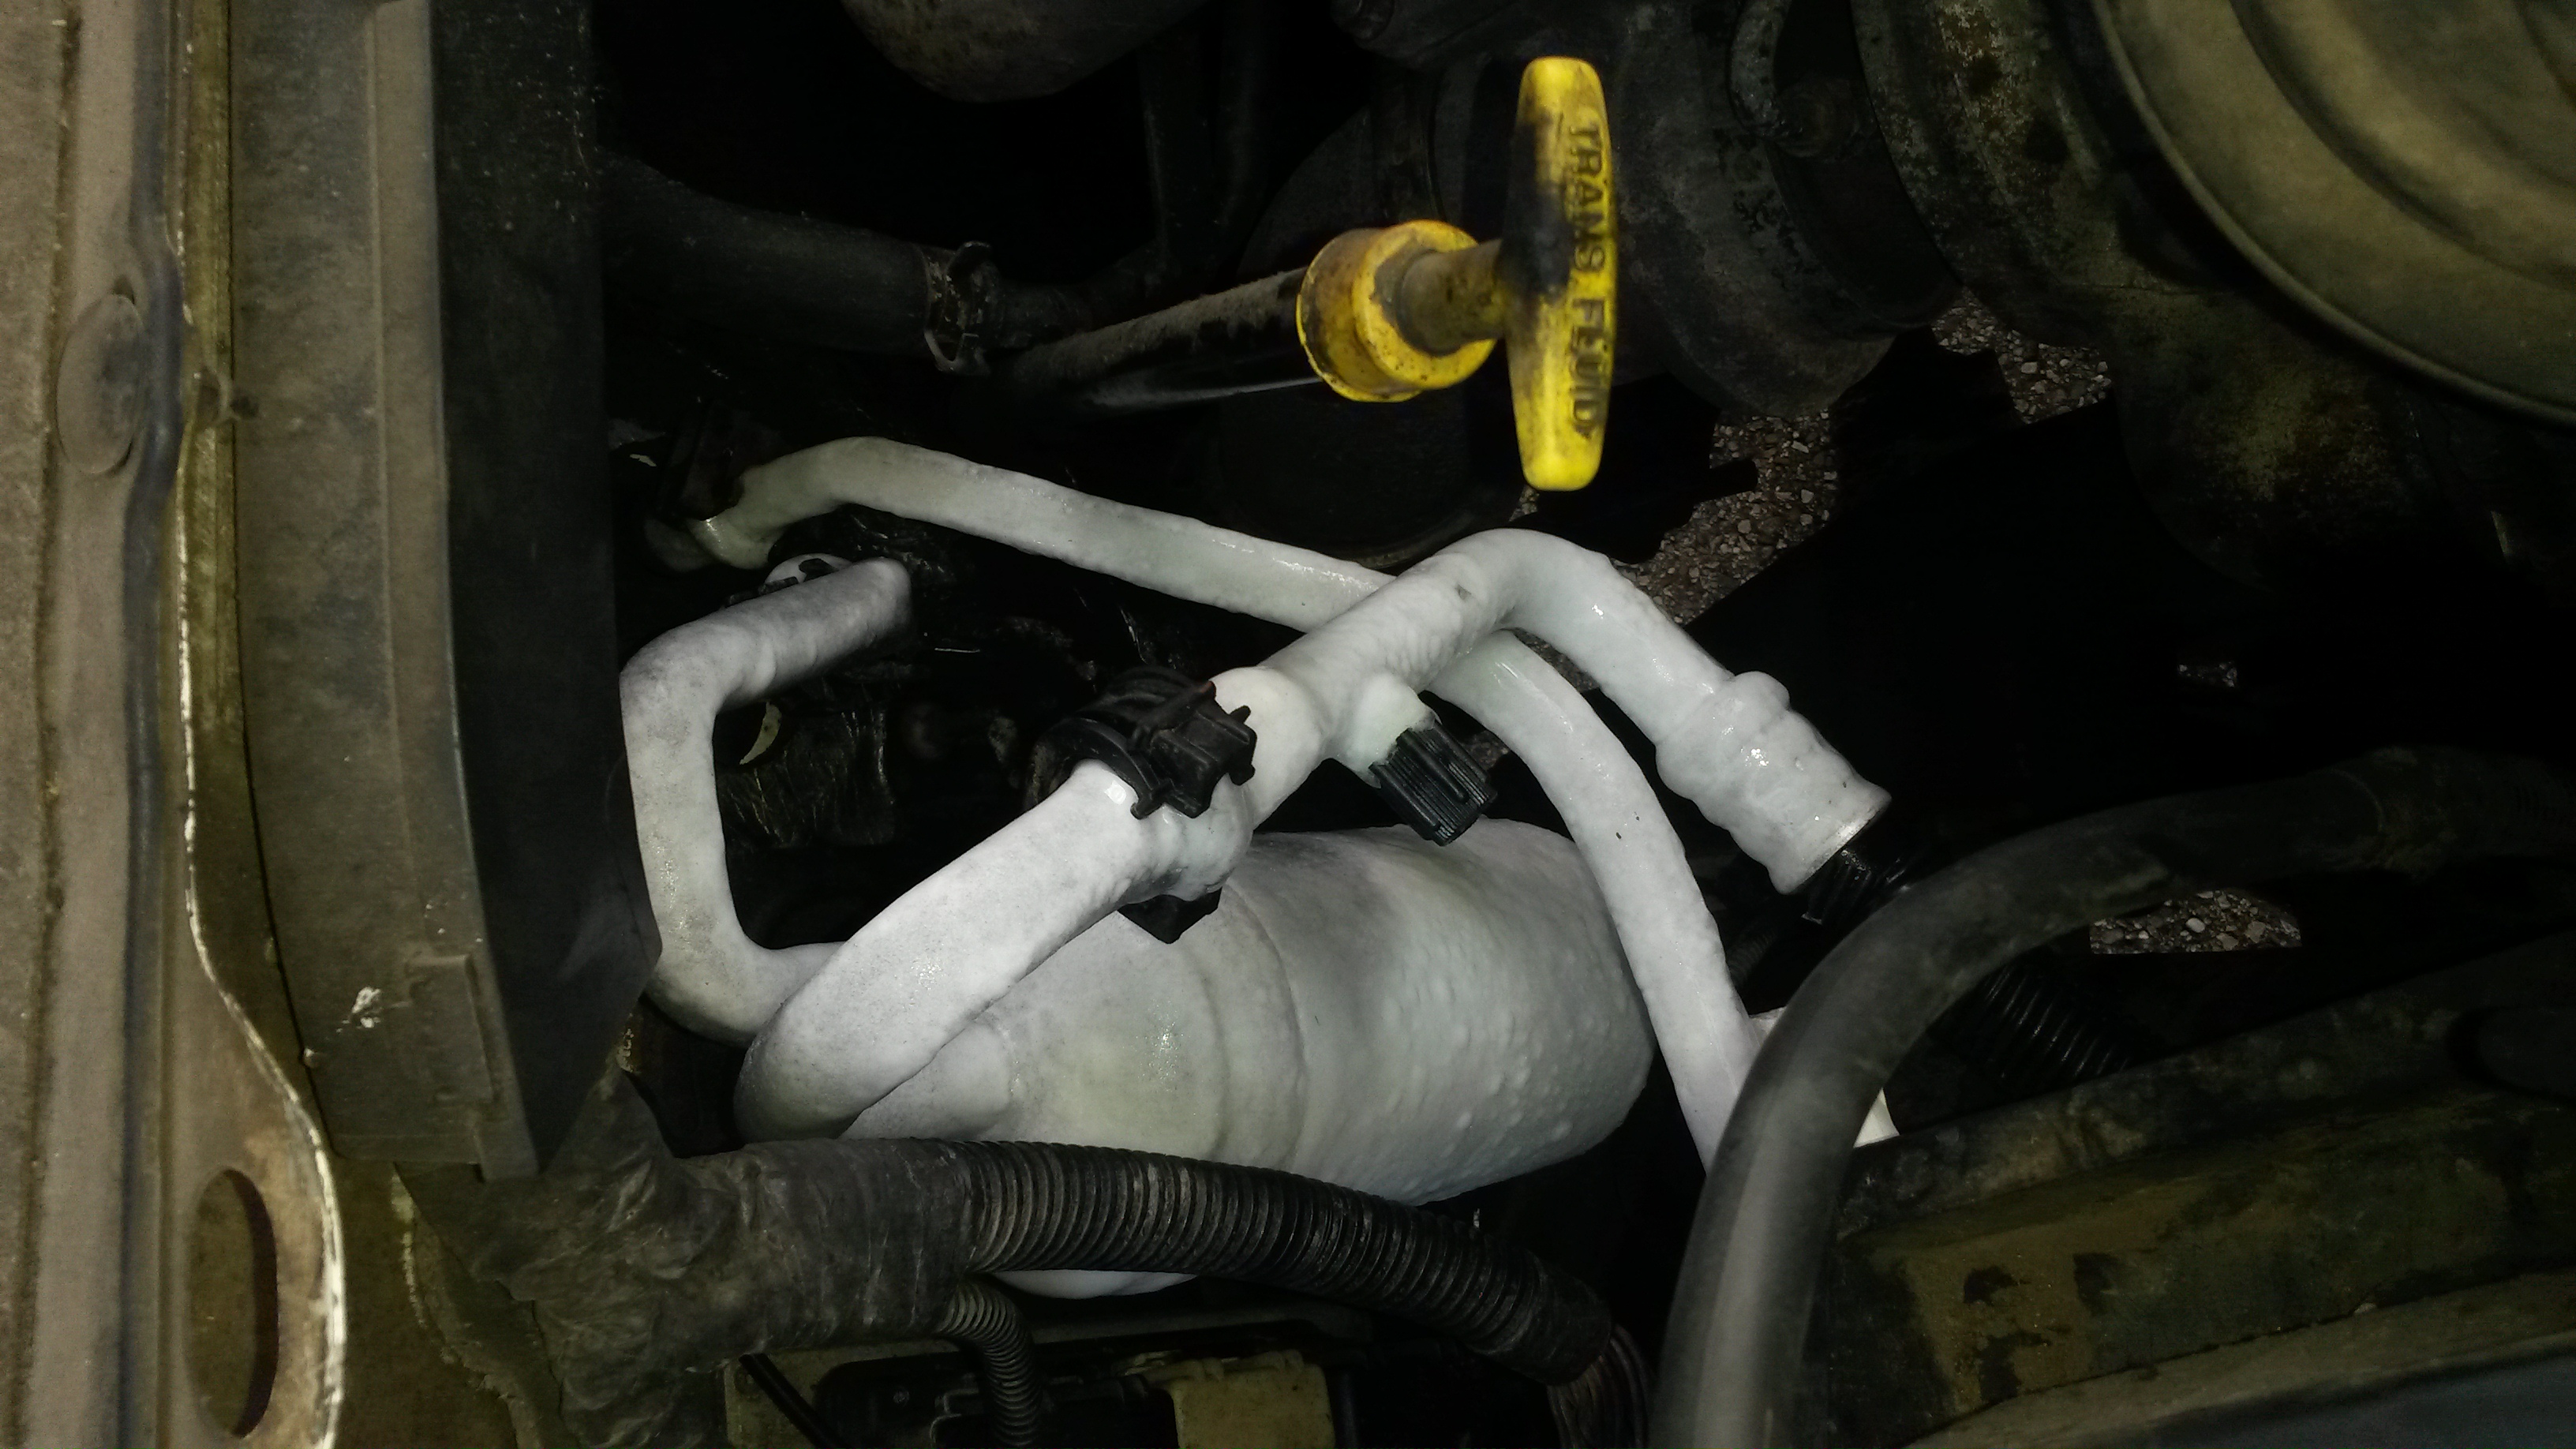 ac compressor not cycling on/off ice buildup - Dodge Diesel - Diesel 6.7 Cummins Ac Compressor Not Engaging